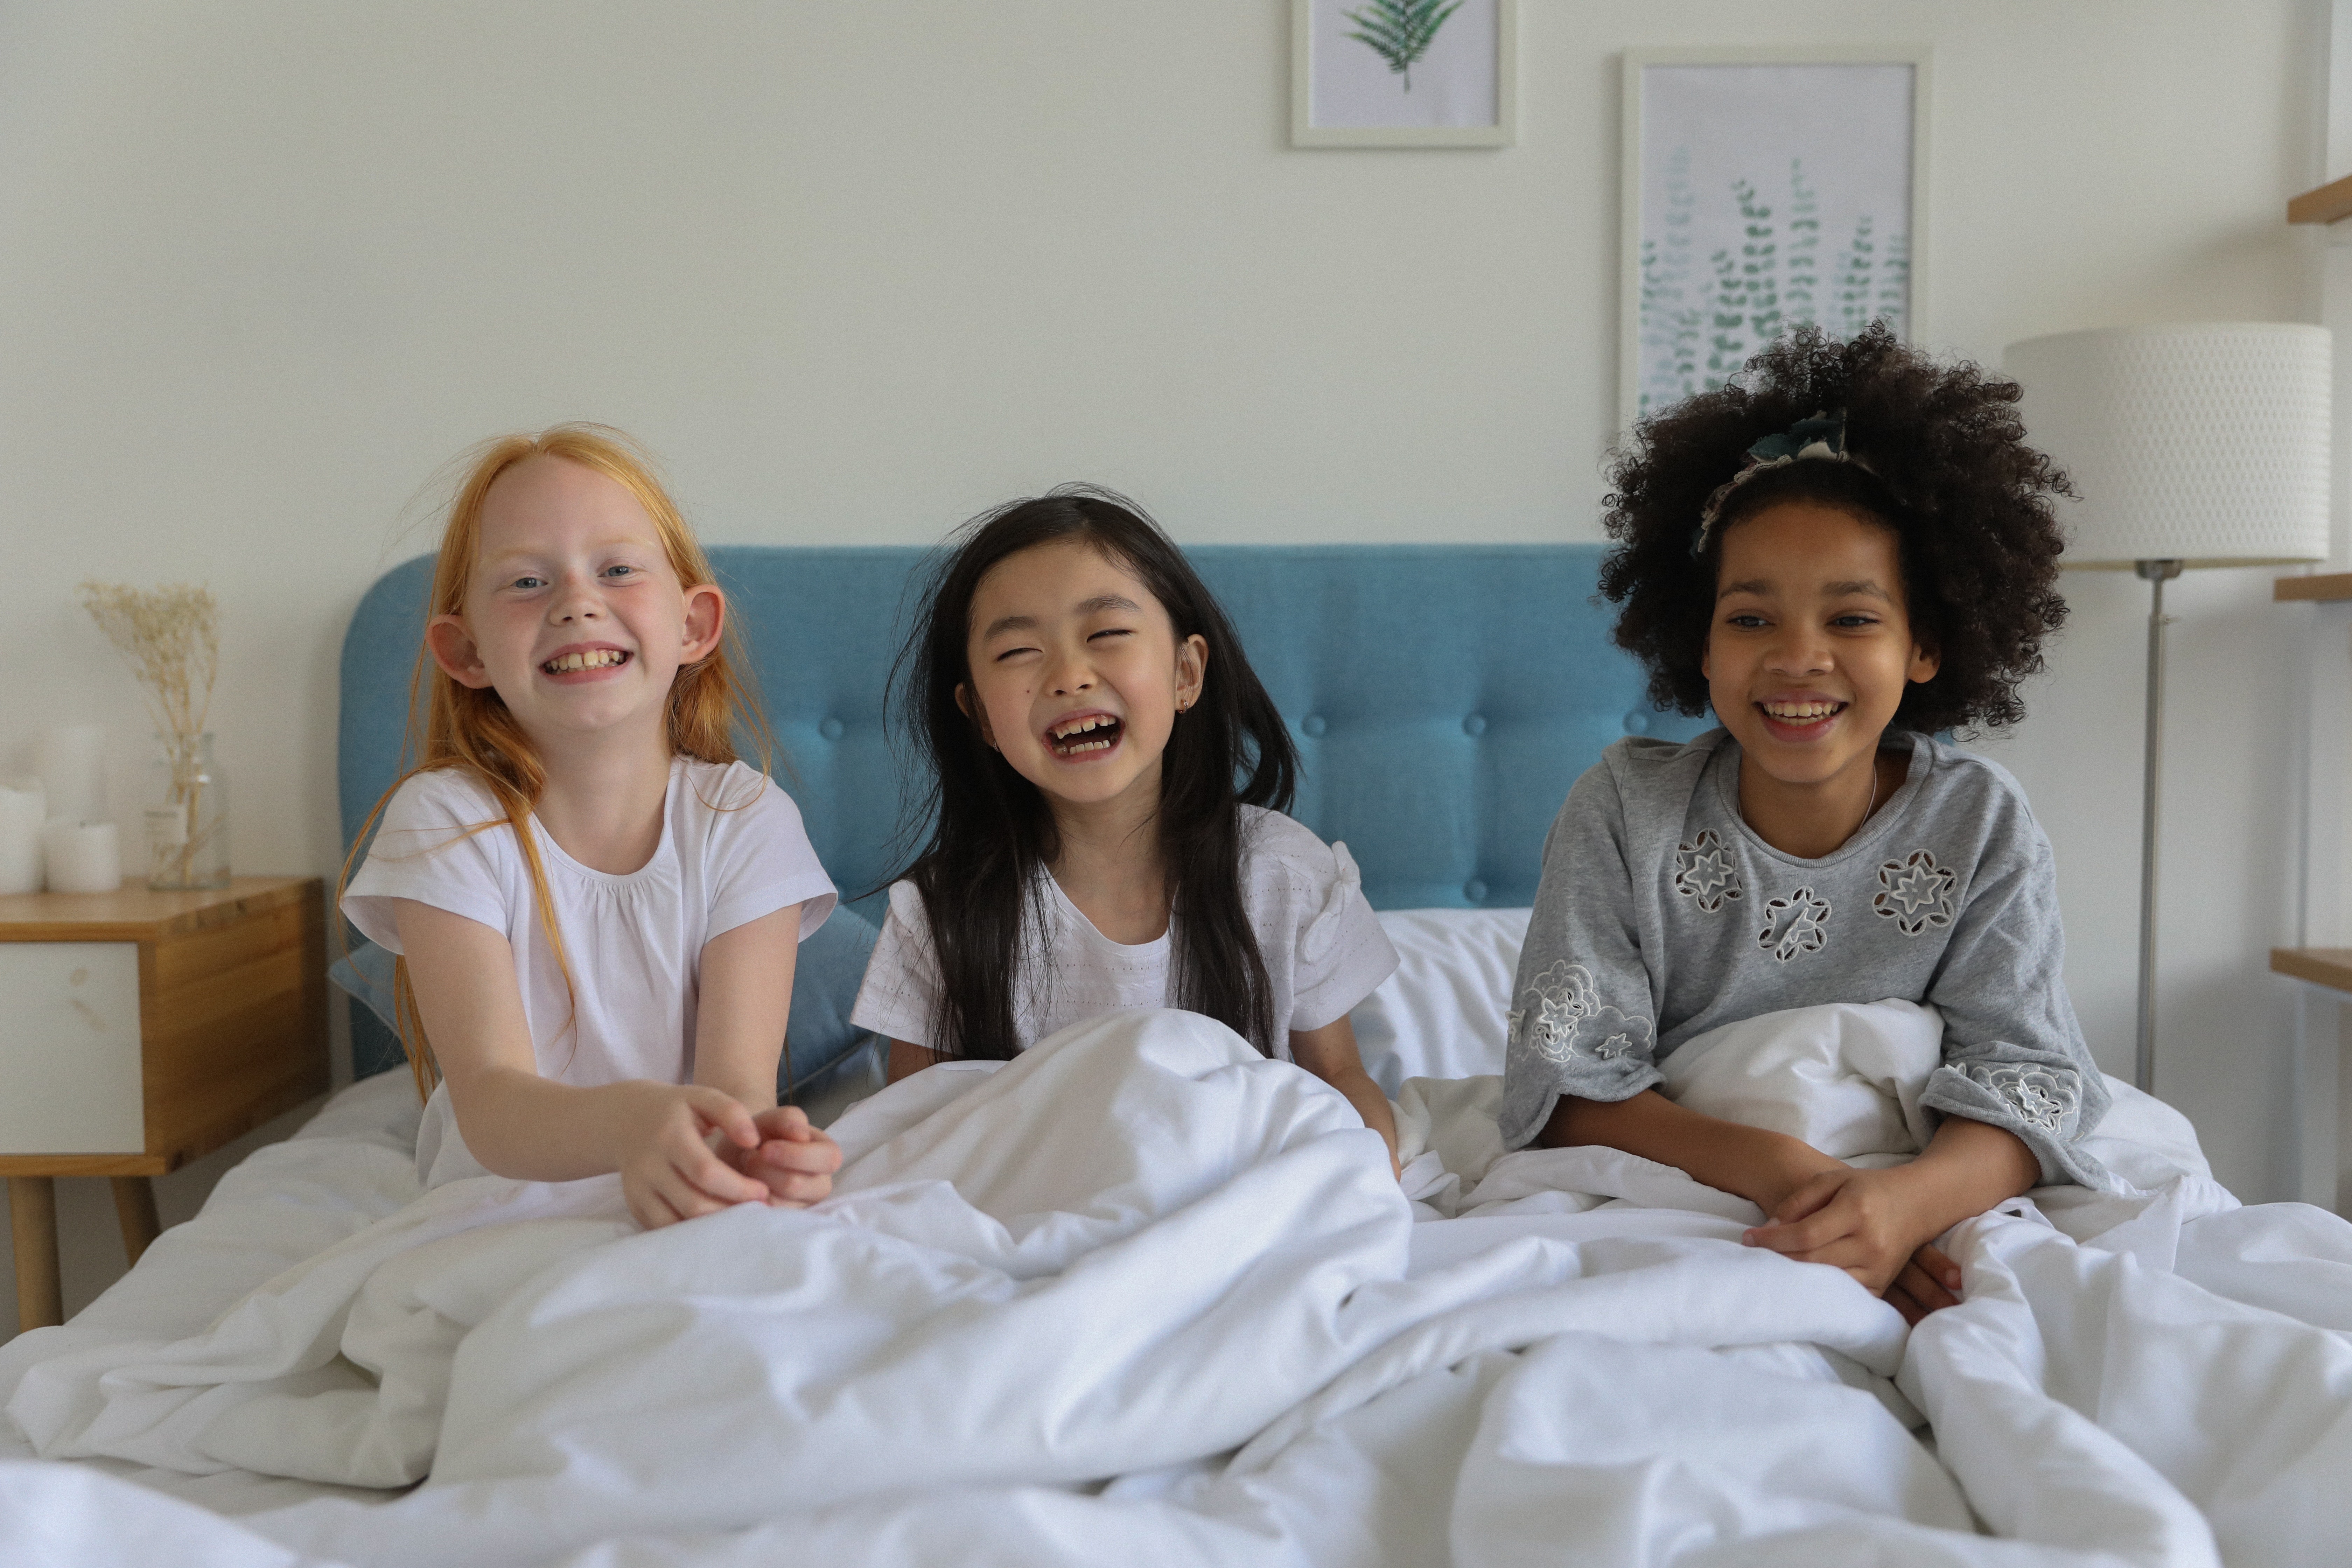 #9 Ideas for Your Daughter’s Upcoming Sleepover Night